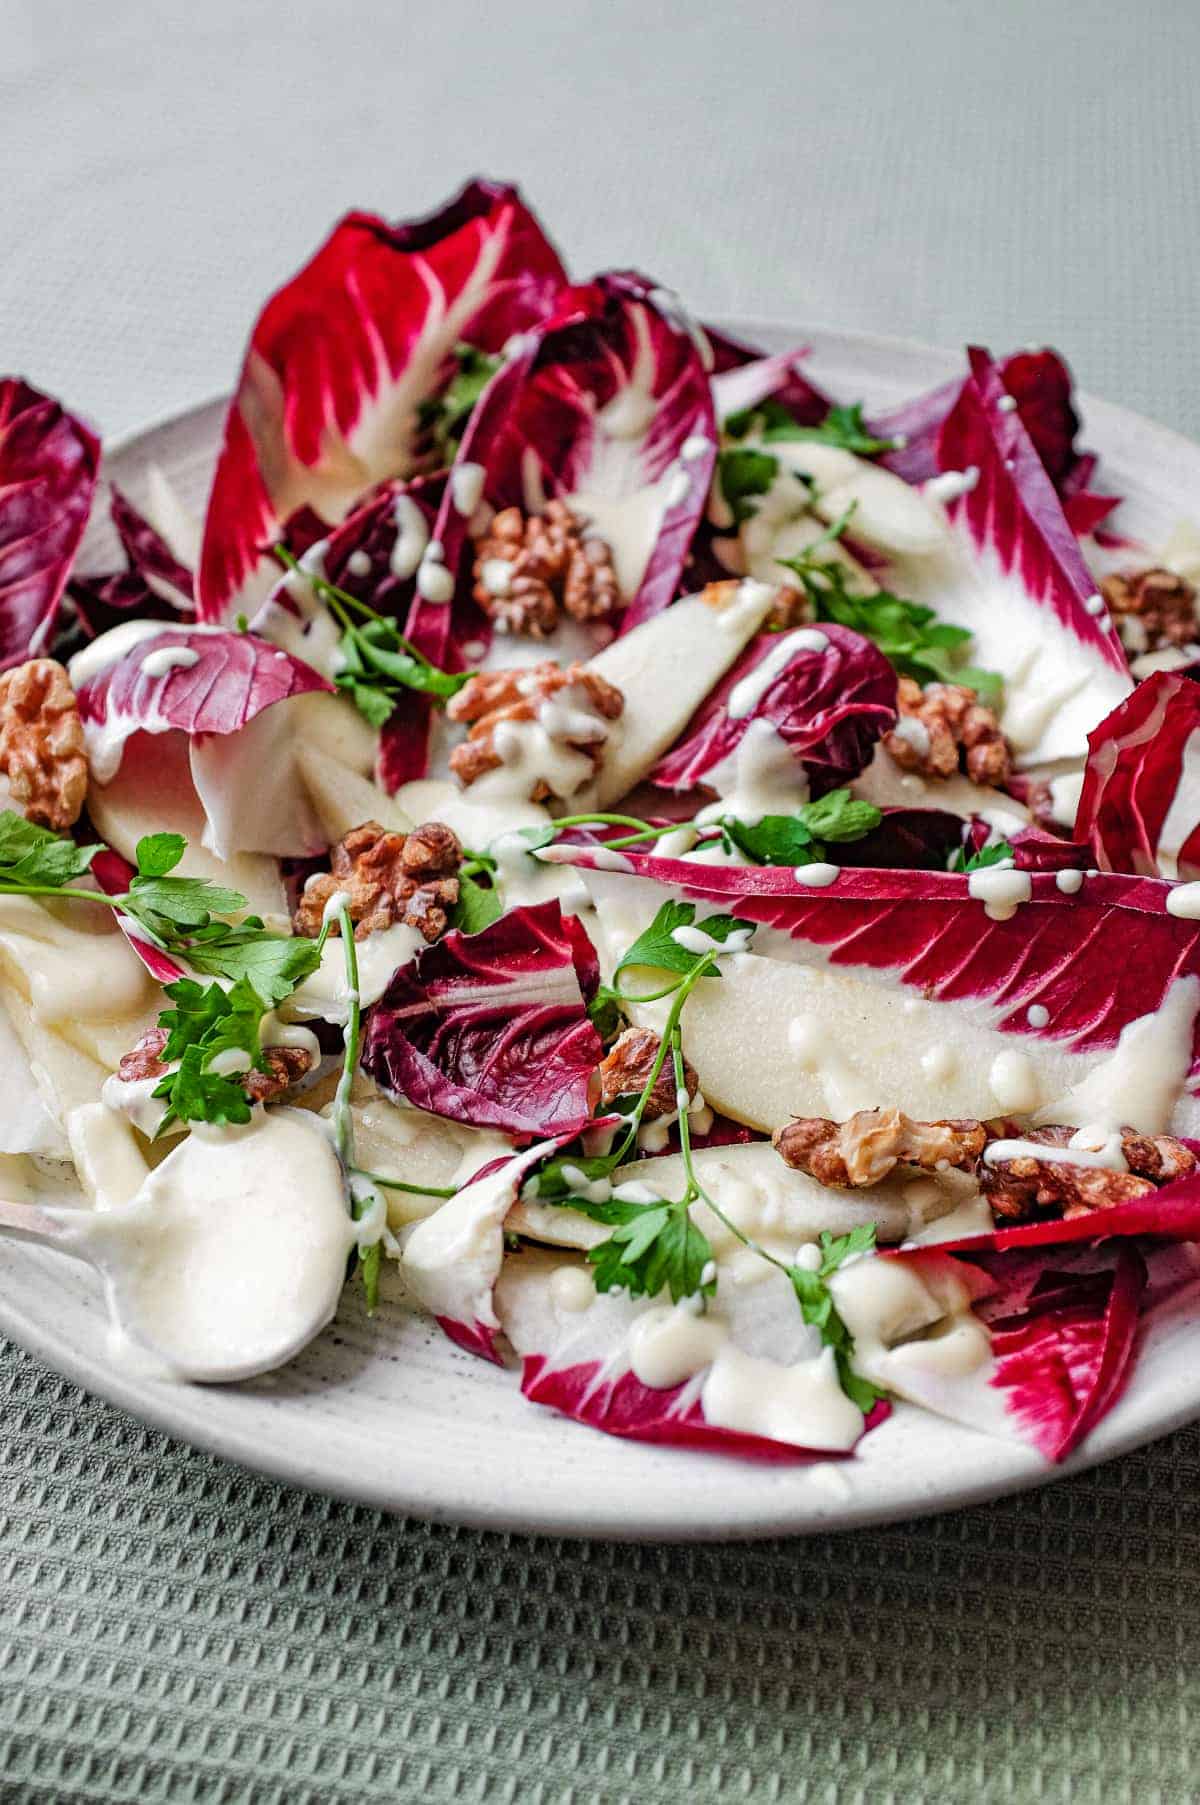 A platter of radicchio salad with pears, walnuts, parsley and a gorgonzola dressing